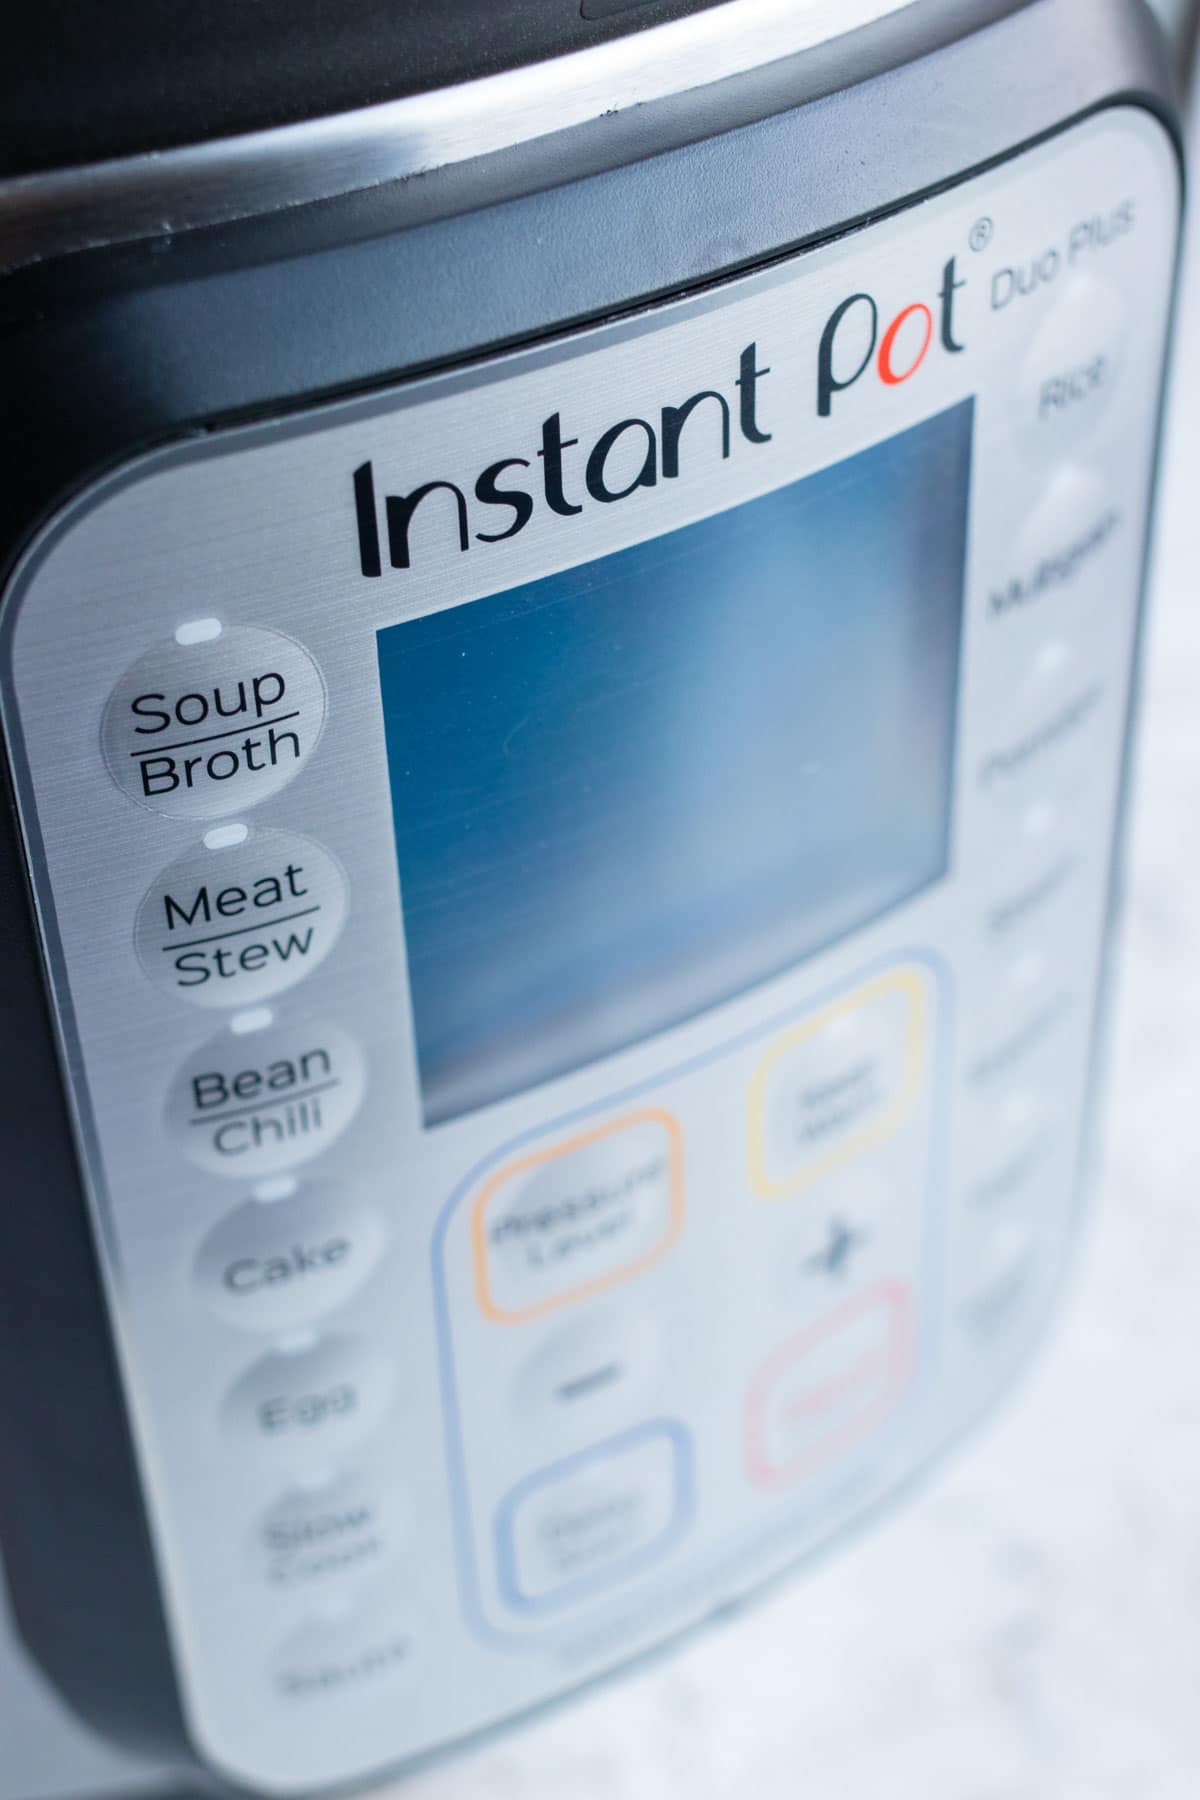 A close-up image of the Instant Pot Duo plus control panel and LCD display.